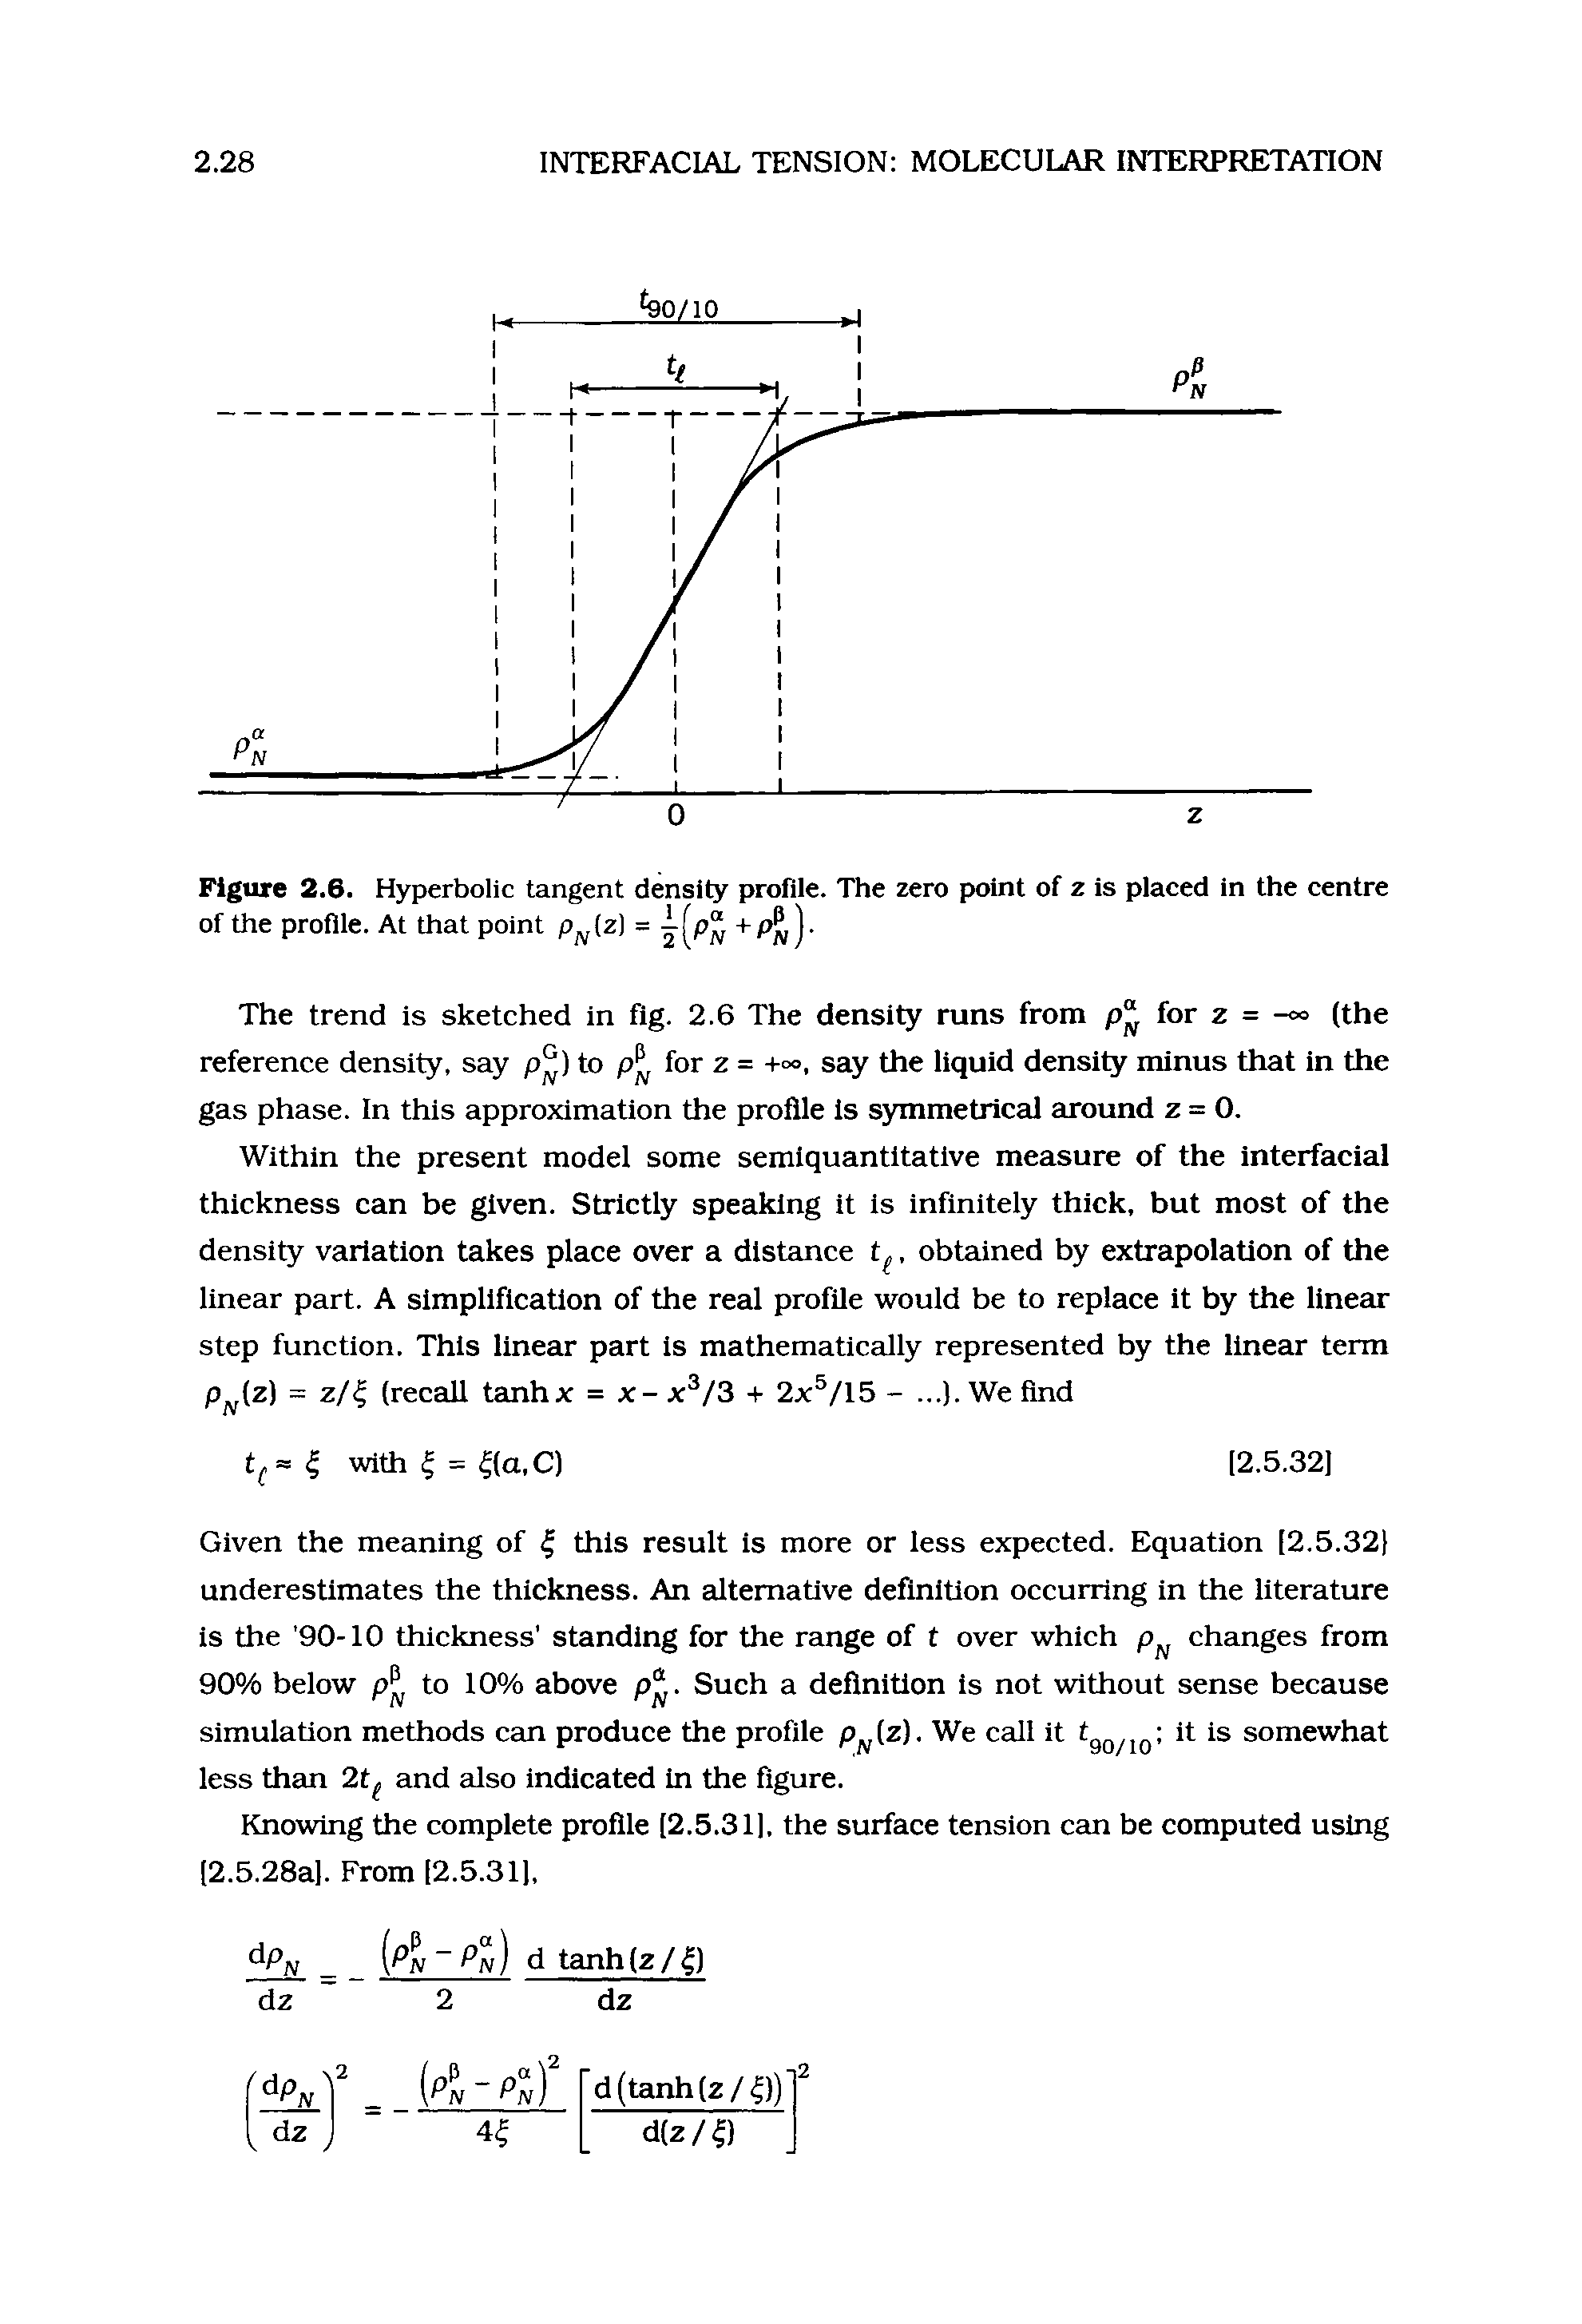 Figure 2.6. Hyperbolic tangent density profile. The zero point of z is placed in the centre of the profile. At that point p (z] = +P )-...